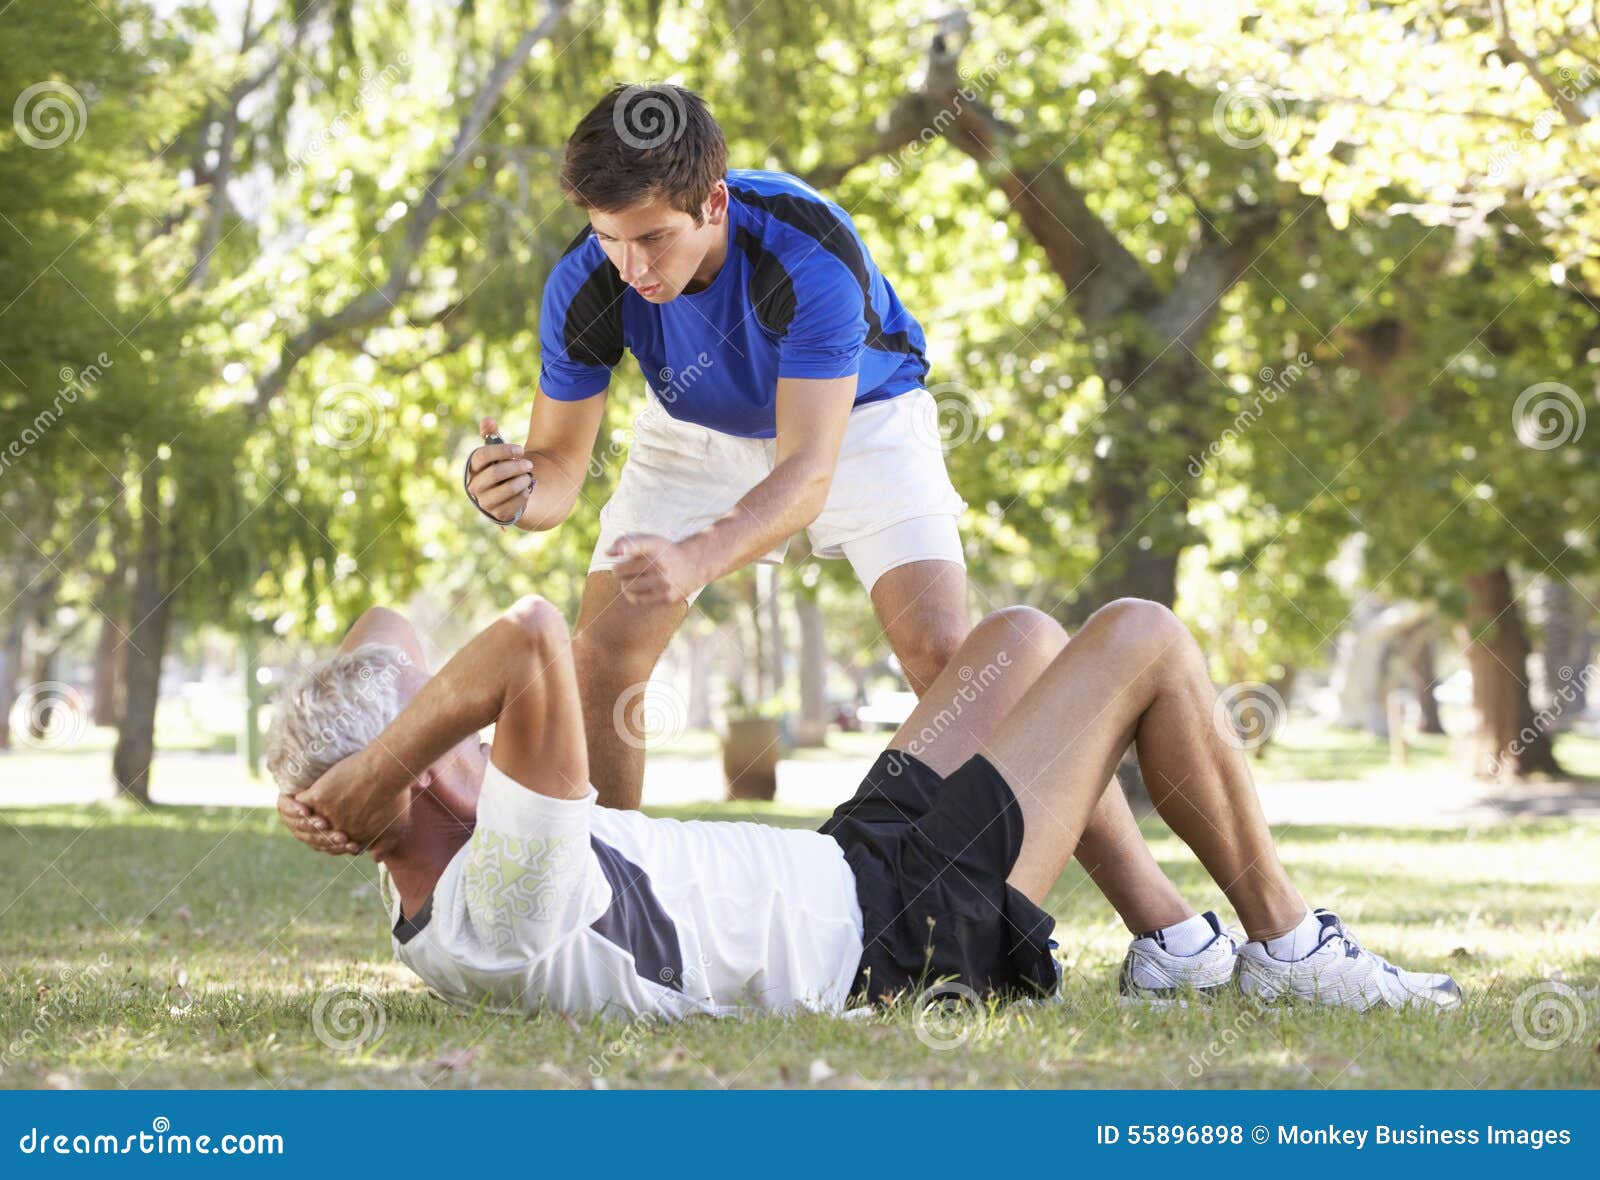 Senior Man Working With Personal Trainer In Park Stock